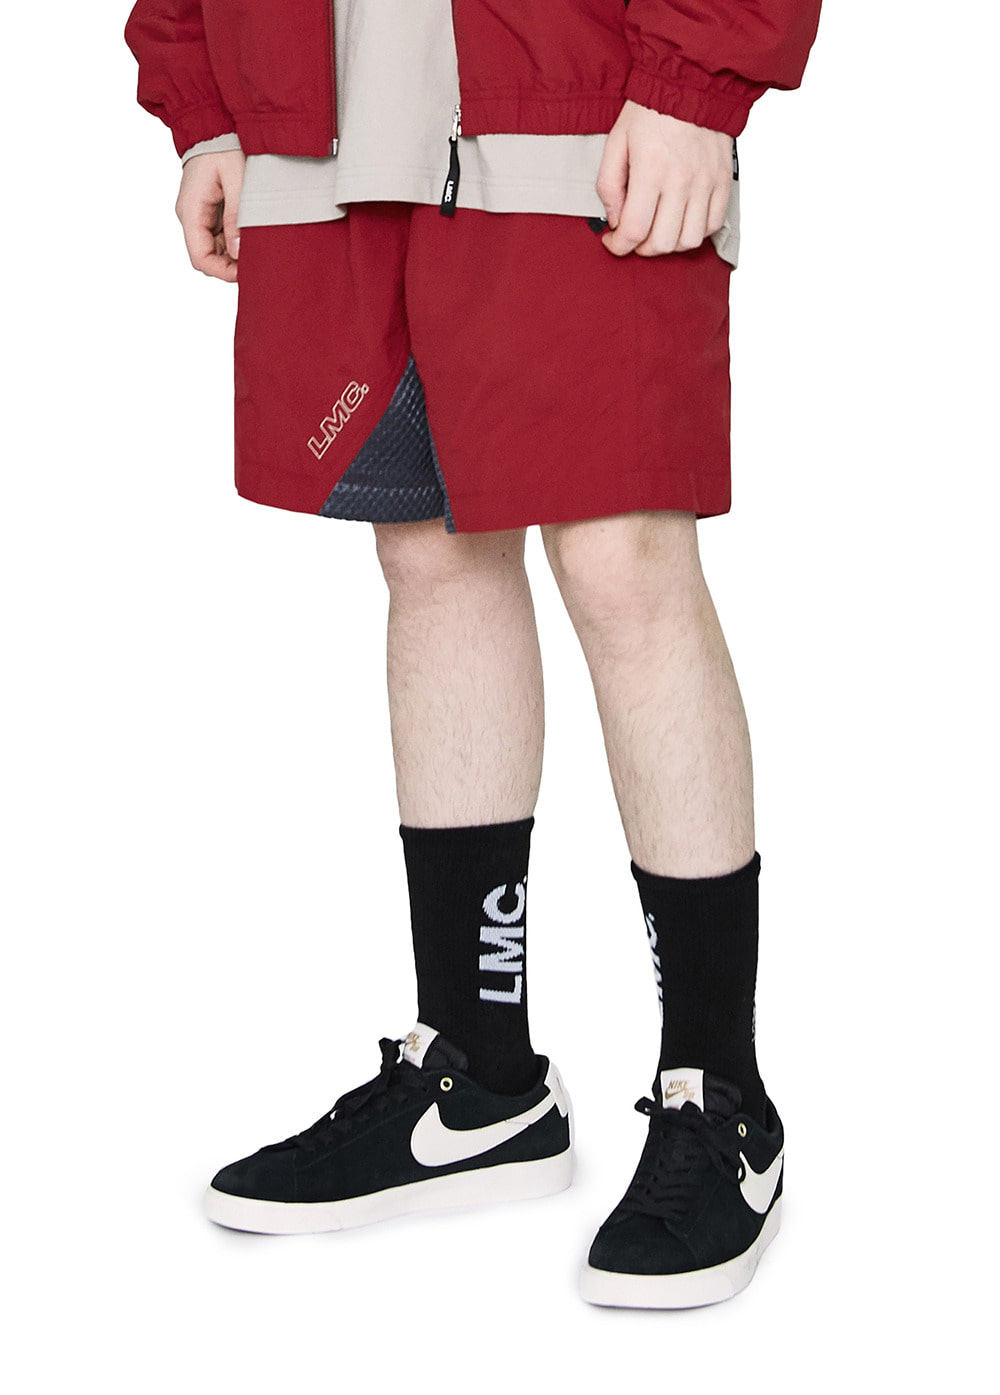 LMC MMWB TRACK SUIT SHORTS red